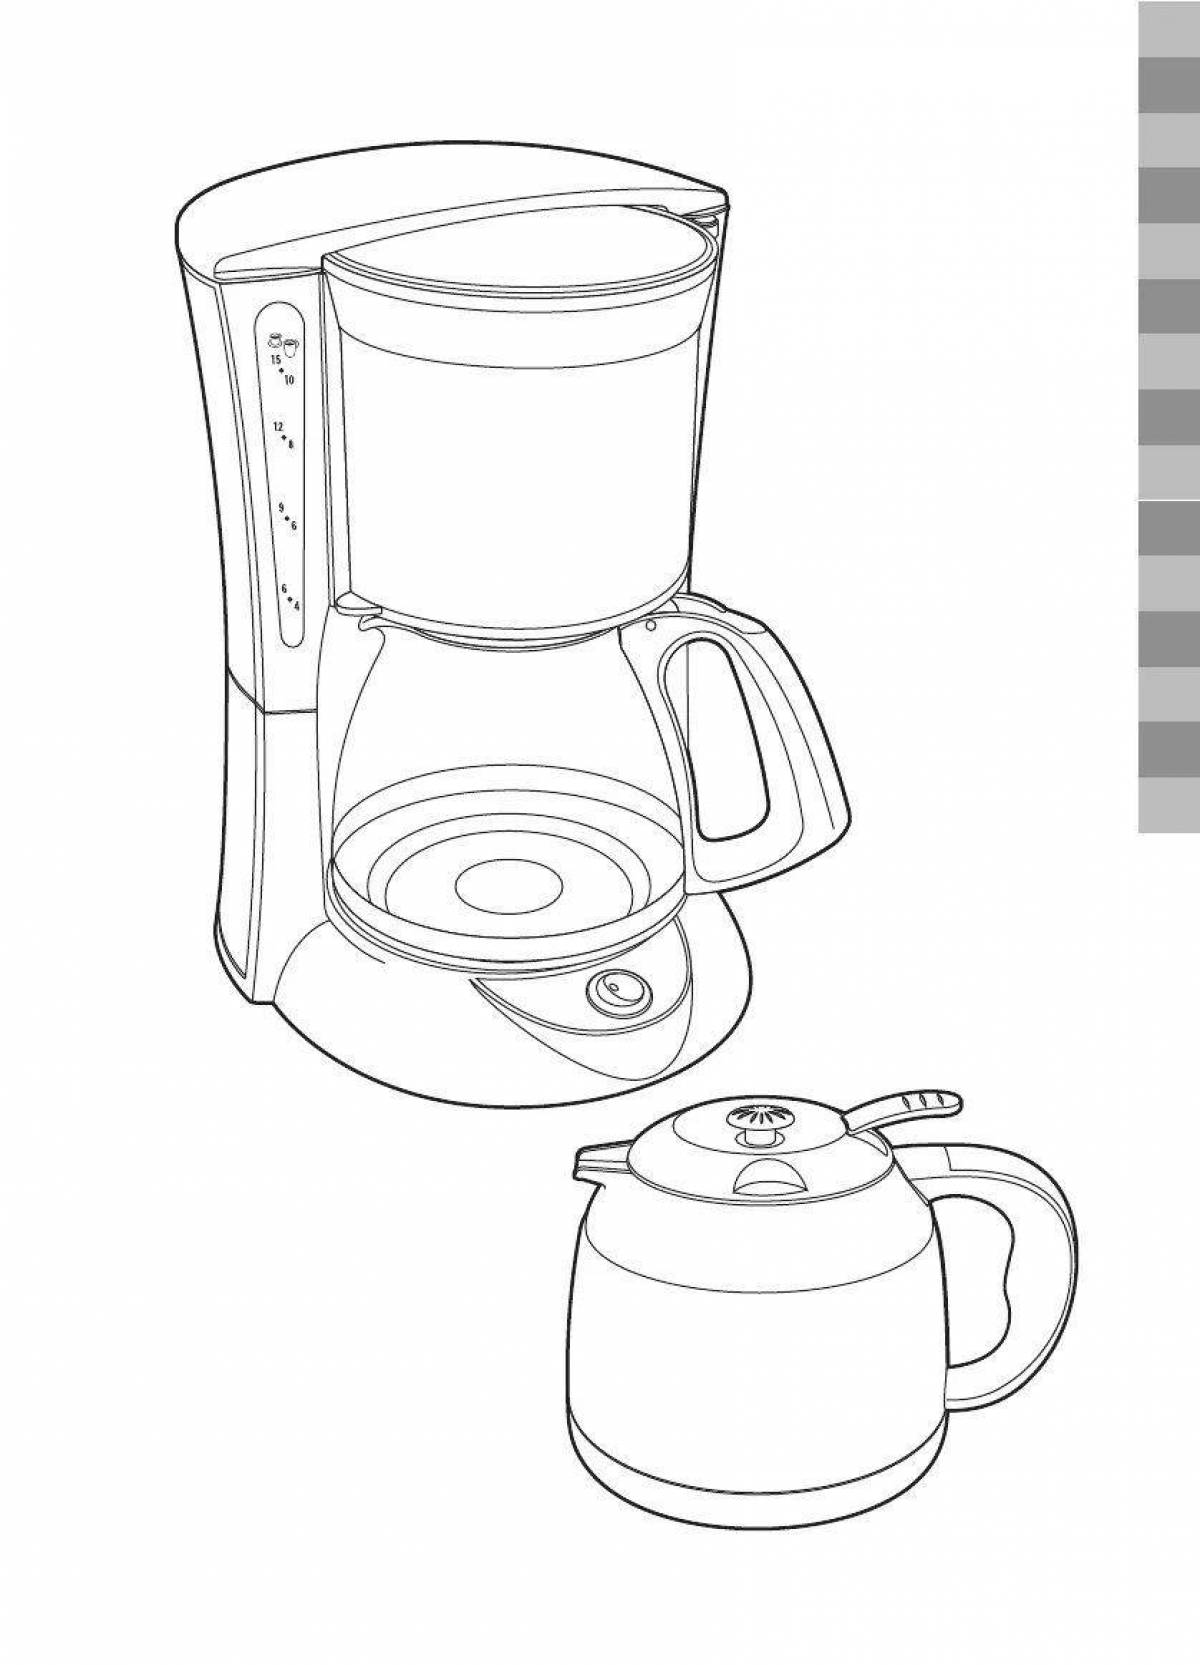 Coffee machine coloring page with bright colors